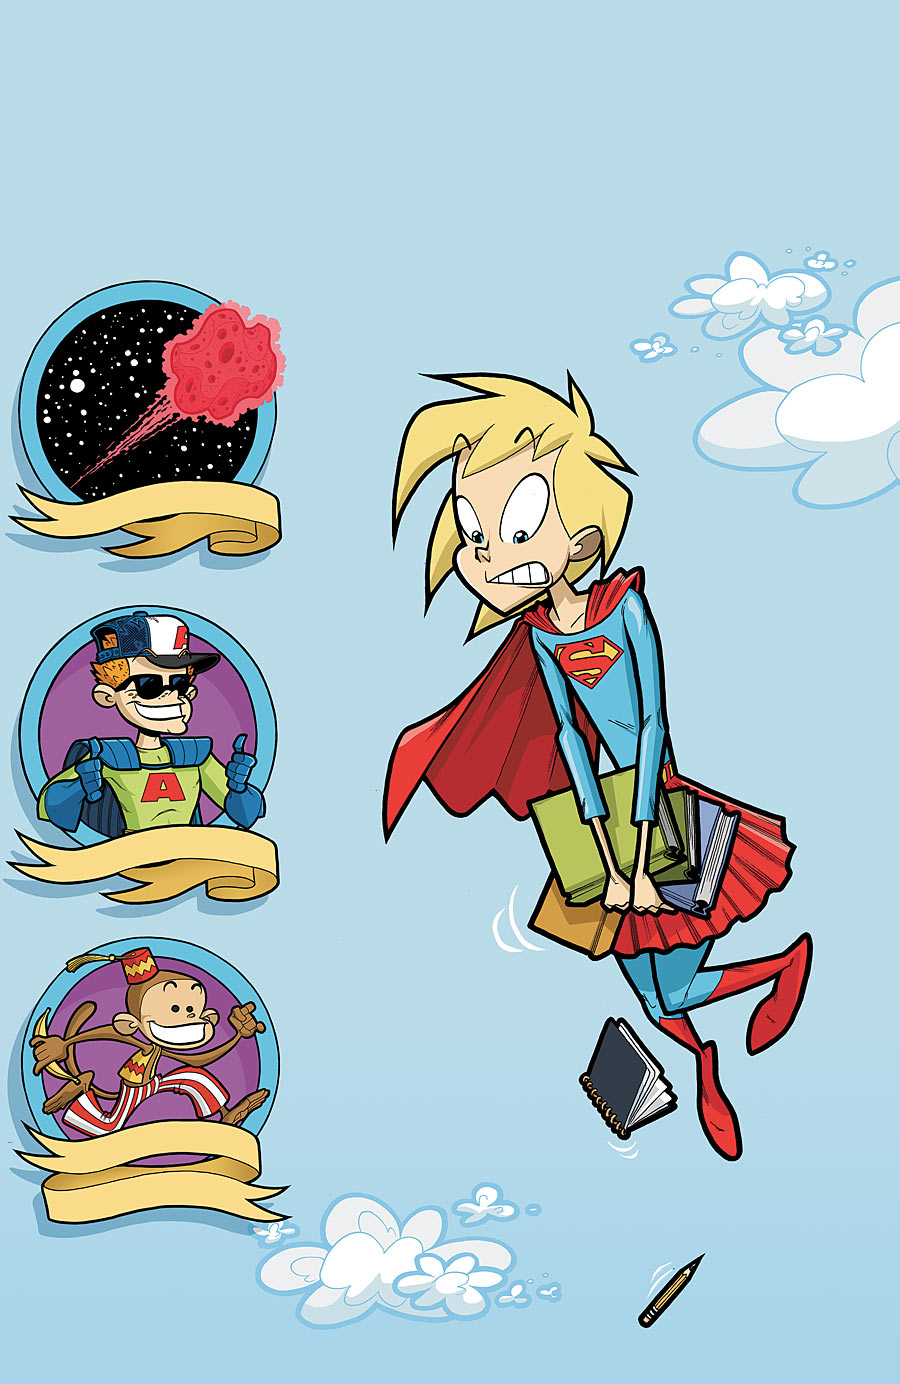 SUPERGIRL: COSMIC ADVENTURES IN THE EIGHTH GRADE #3